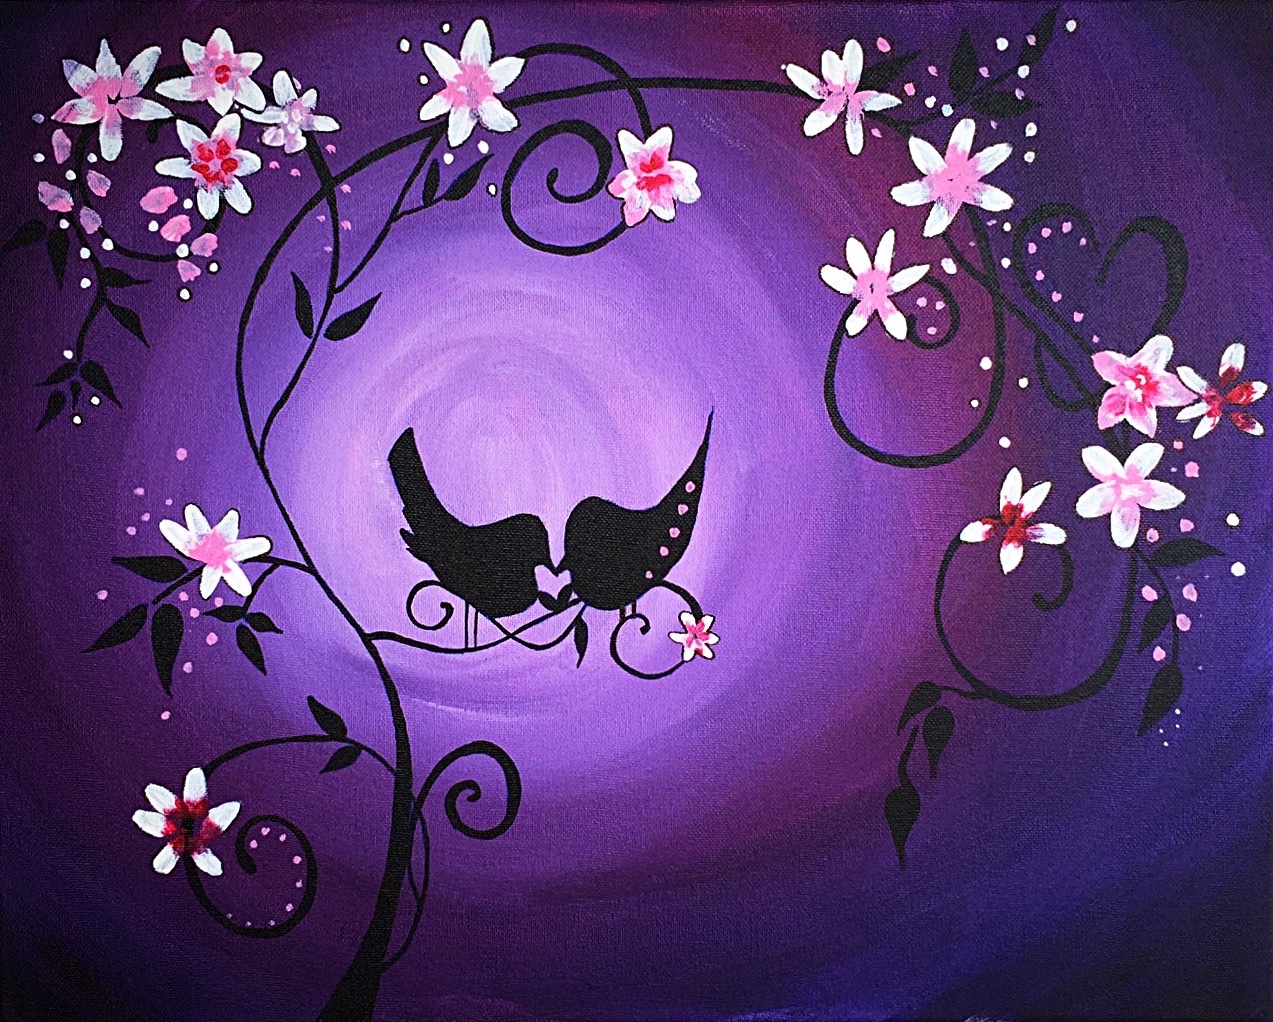 A The World Blooms Through Love paint nite project by Yaymaker